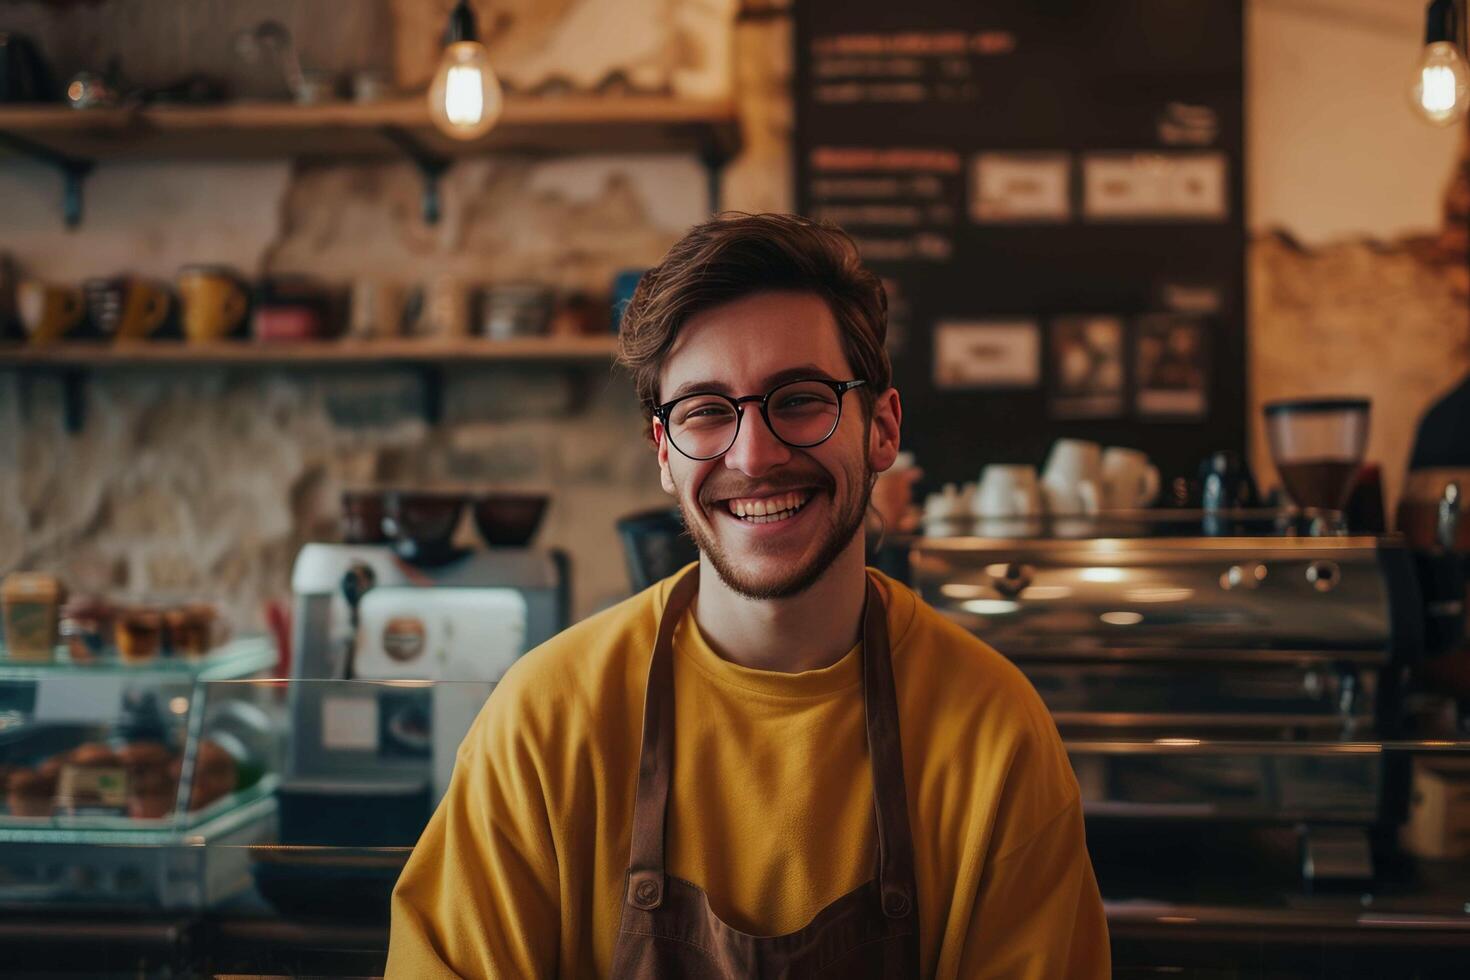 AI generated a smiling man in an apron standing in front of a coffee shop photo